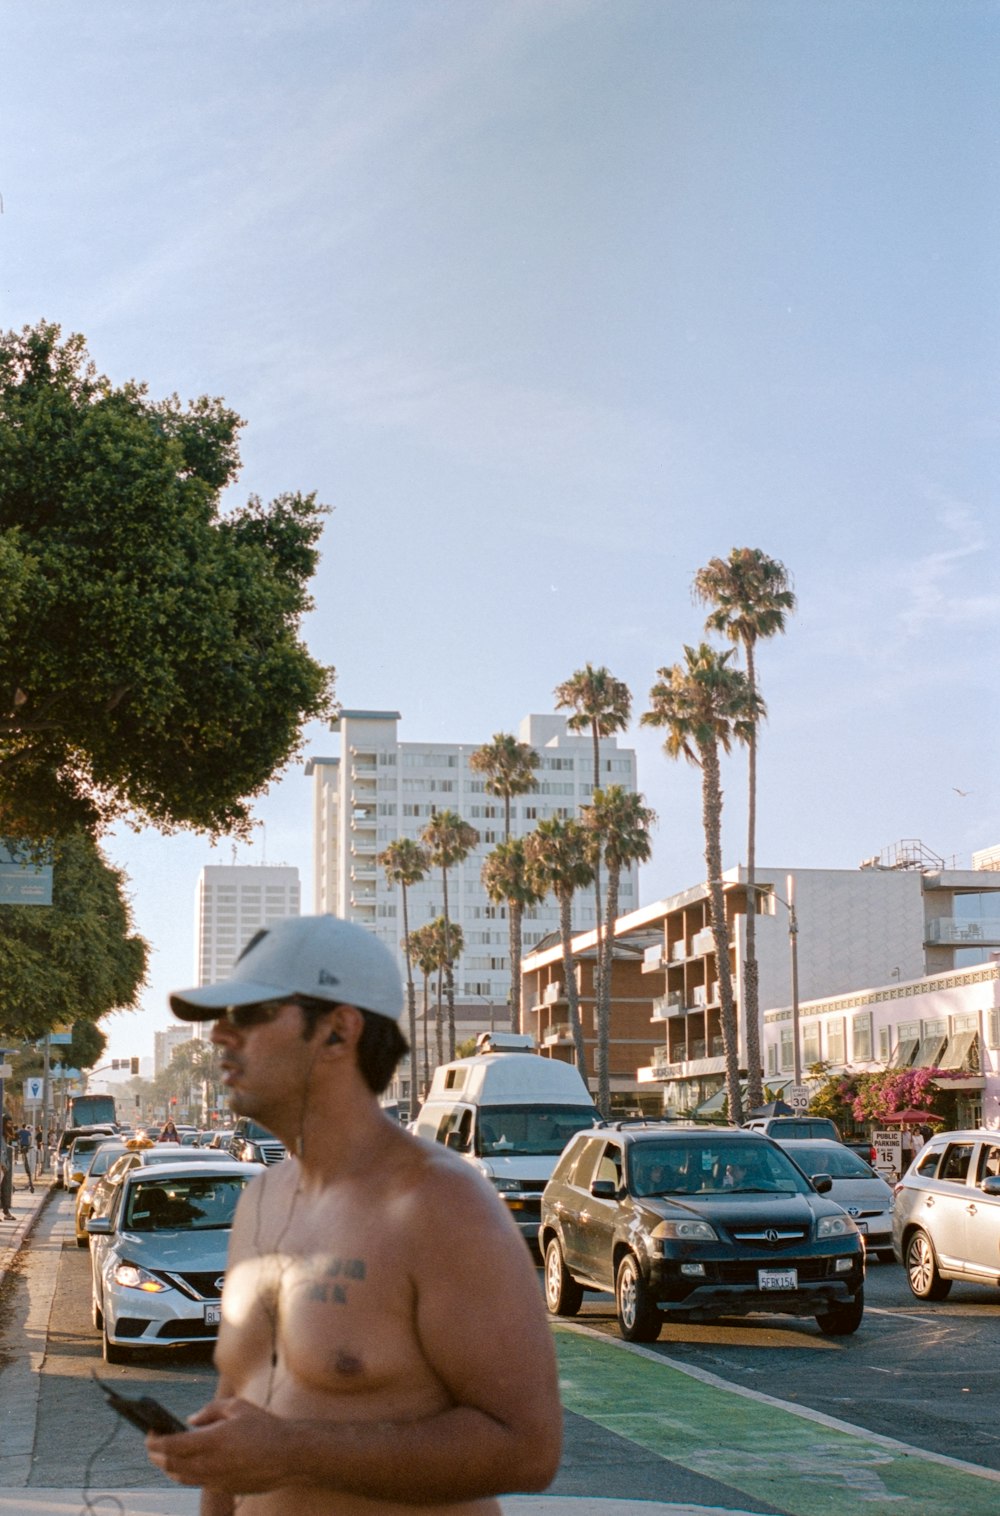 man in white hat standing near cars during daytime